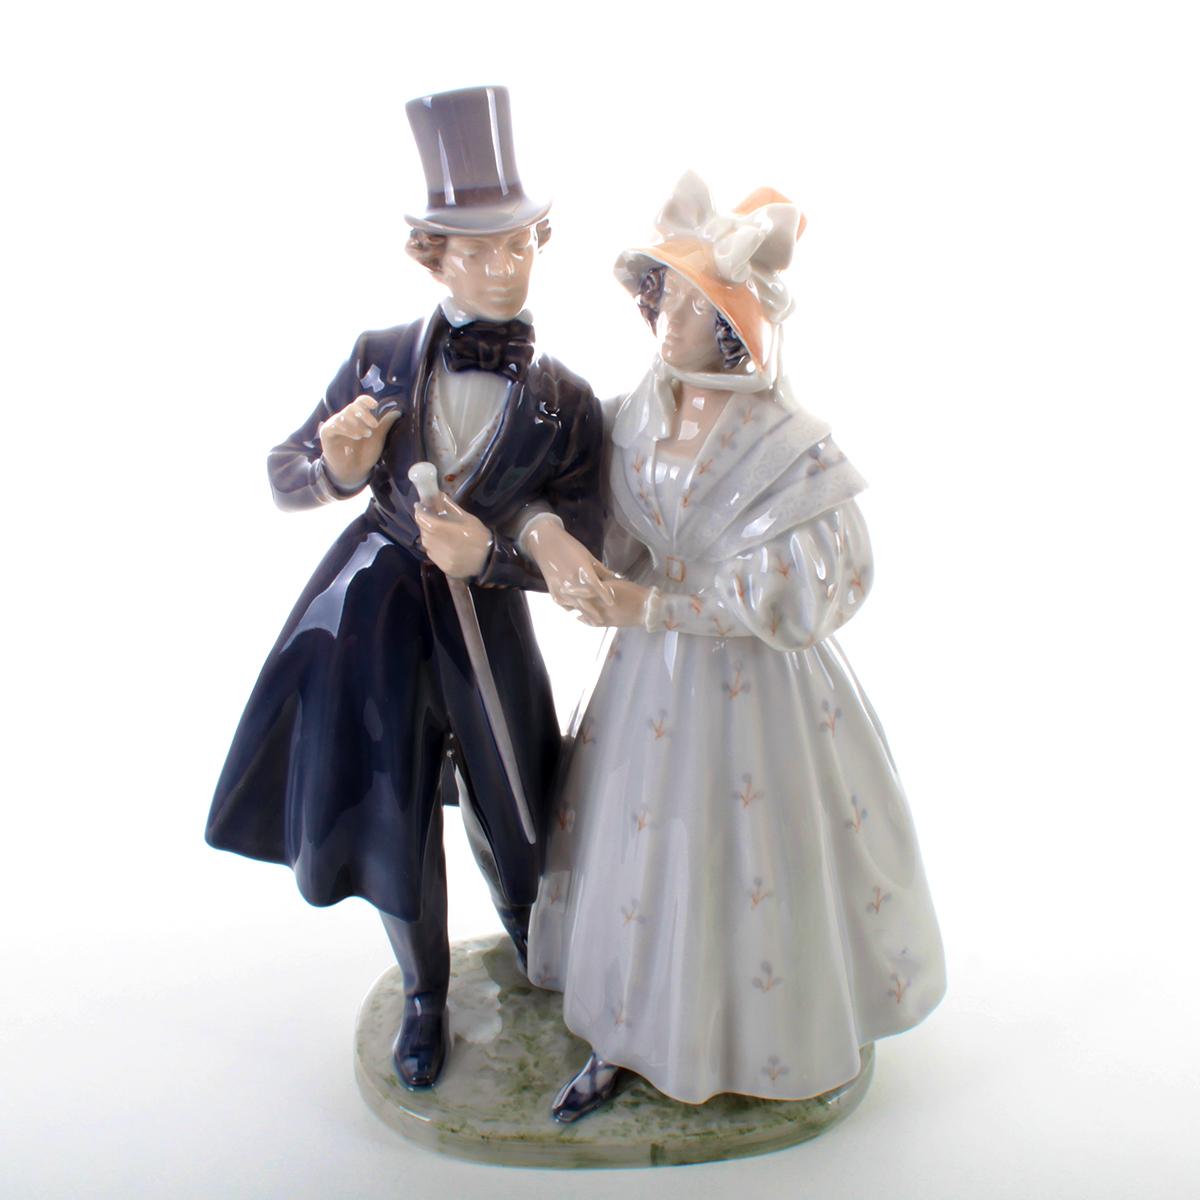 Evening Stroll at Tivoli Gardens figurine - porcelain figurine by Royal Copenhagen - beautiful and detailed porcelain figurine in pristine condition - grade A!

The figurine is modeled as a young couple enjoying an evening stroll at Tivoli